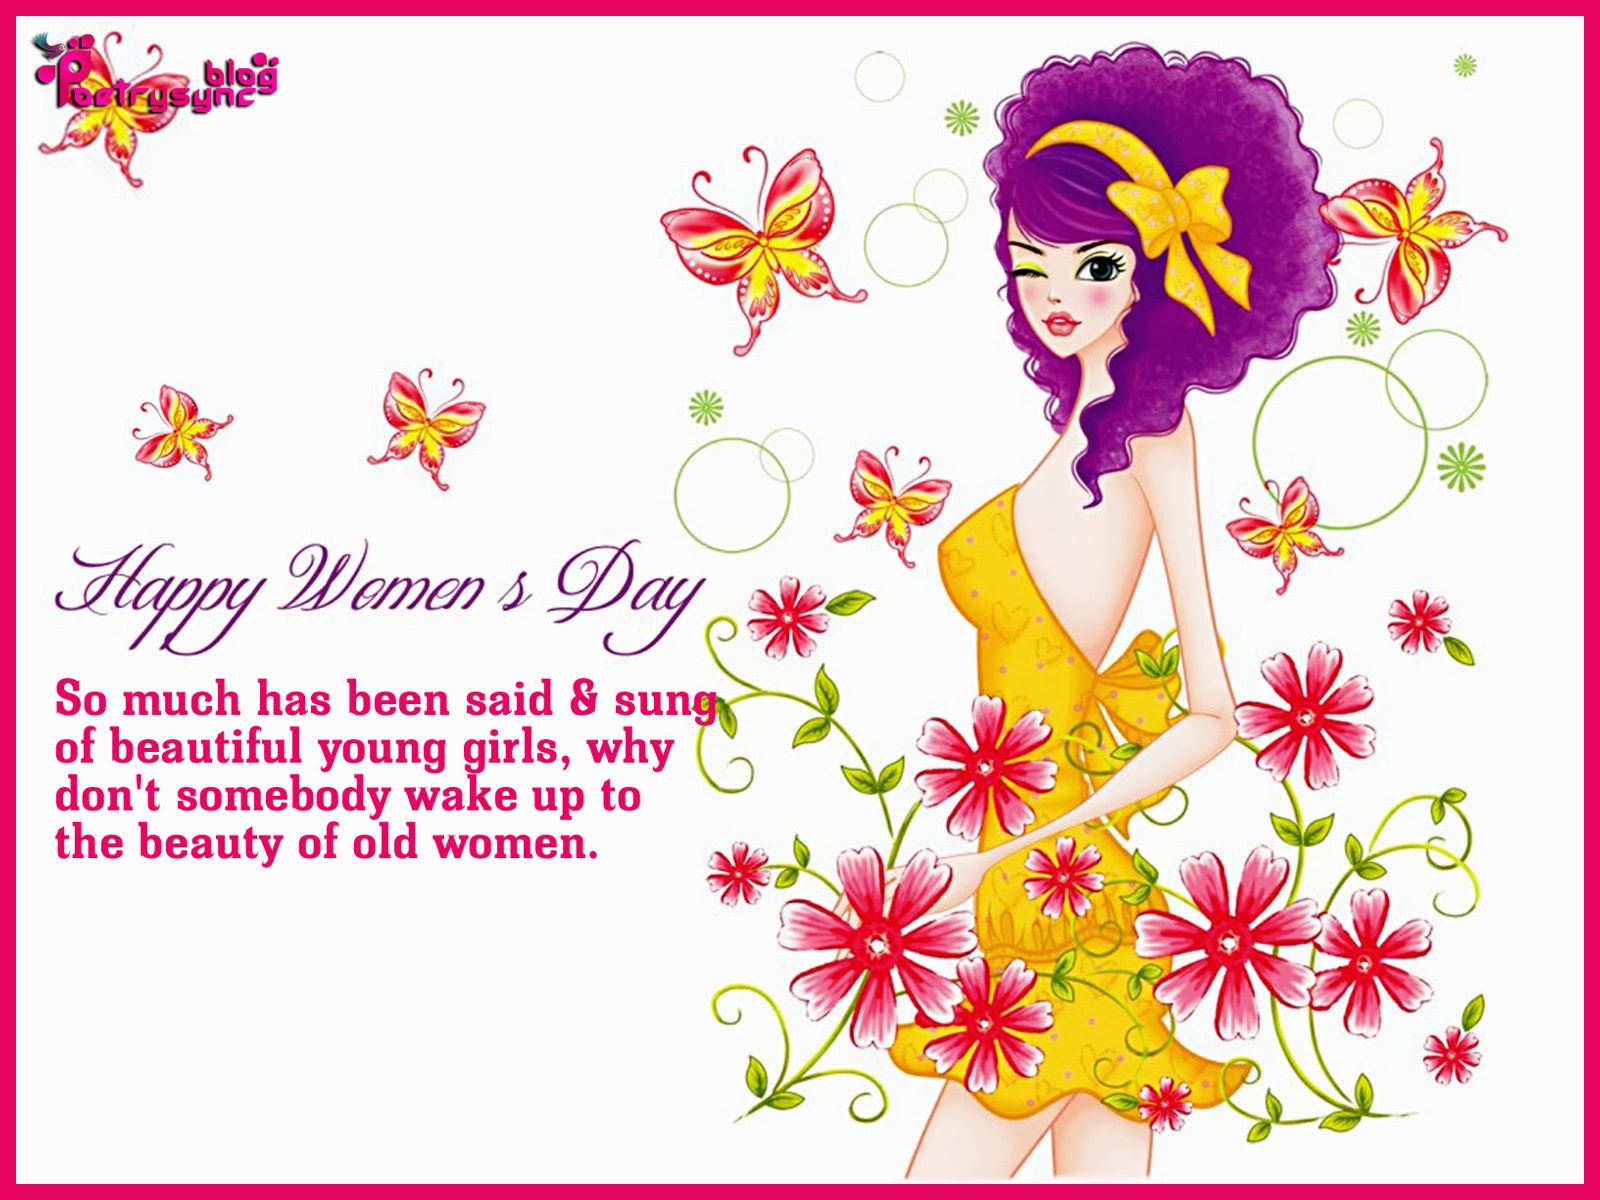 25+ Women's Day Whatsapp Status & Messages for Facebook - PolesMag